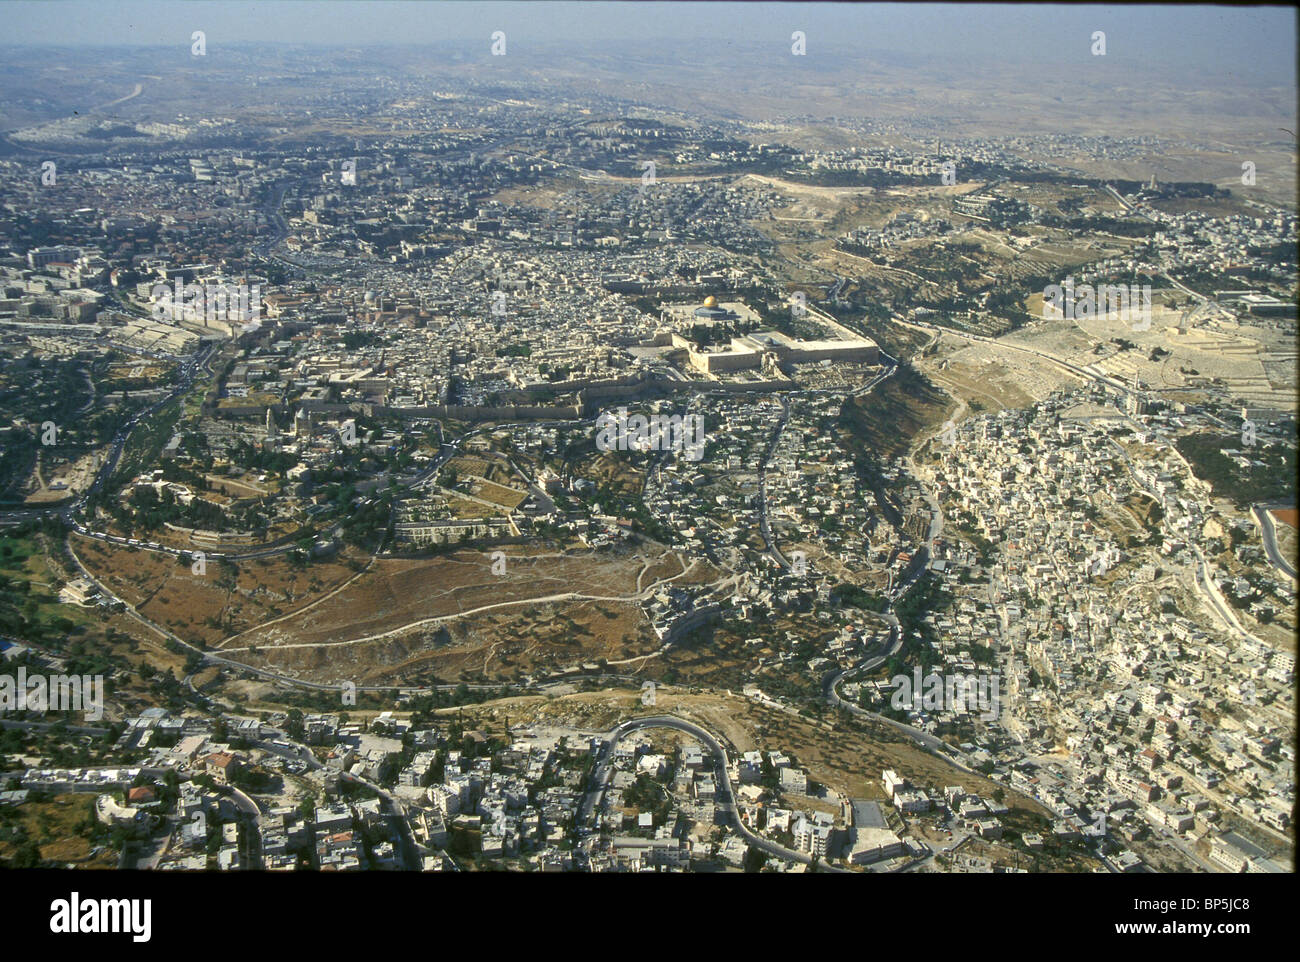 3746. JERUSALEM, AERIAL VIEW FROM THE SOUTH WITH MT. ZION ON THE LEFT AND THE CITY OF DAVID ON THE RIGHT Stock Photo